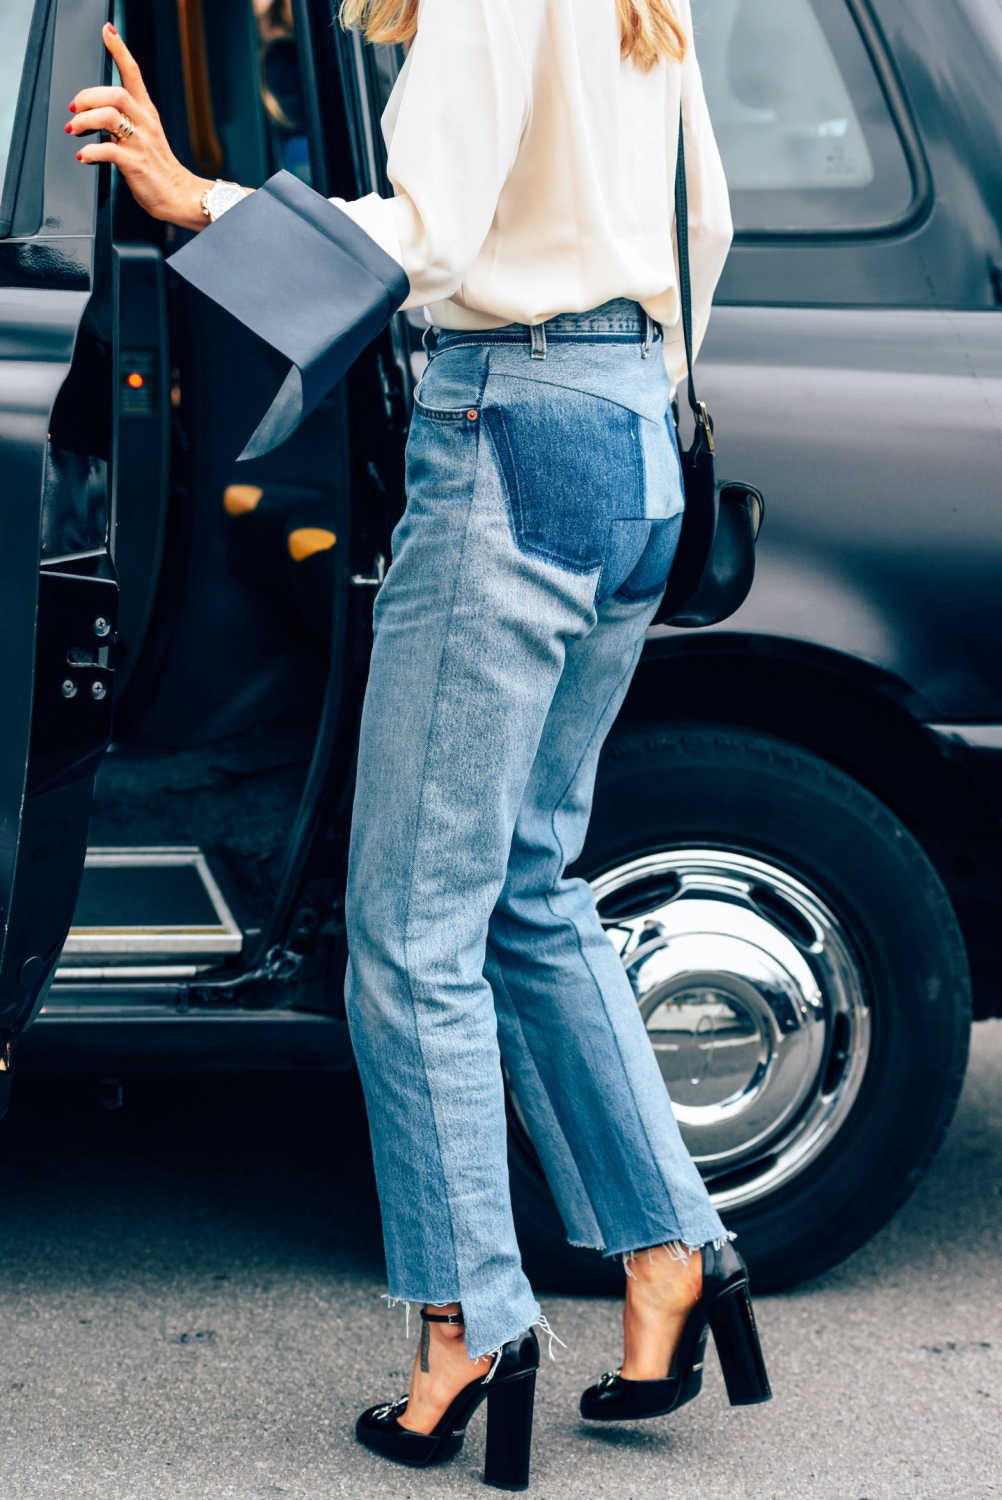 How To Wear The Frayed Hem Jeans Trend Like A Babe